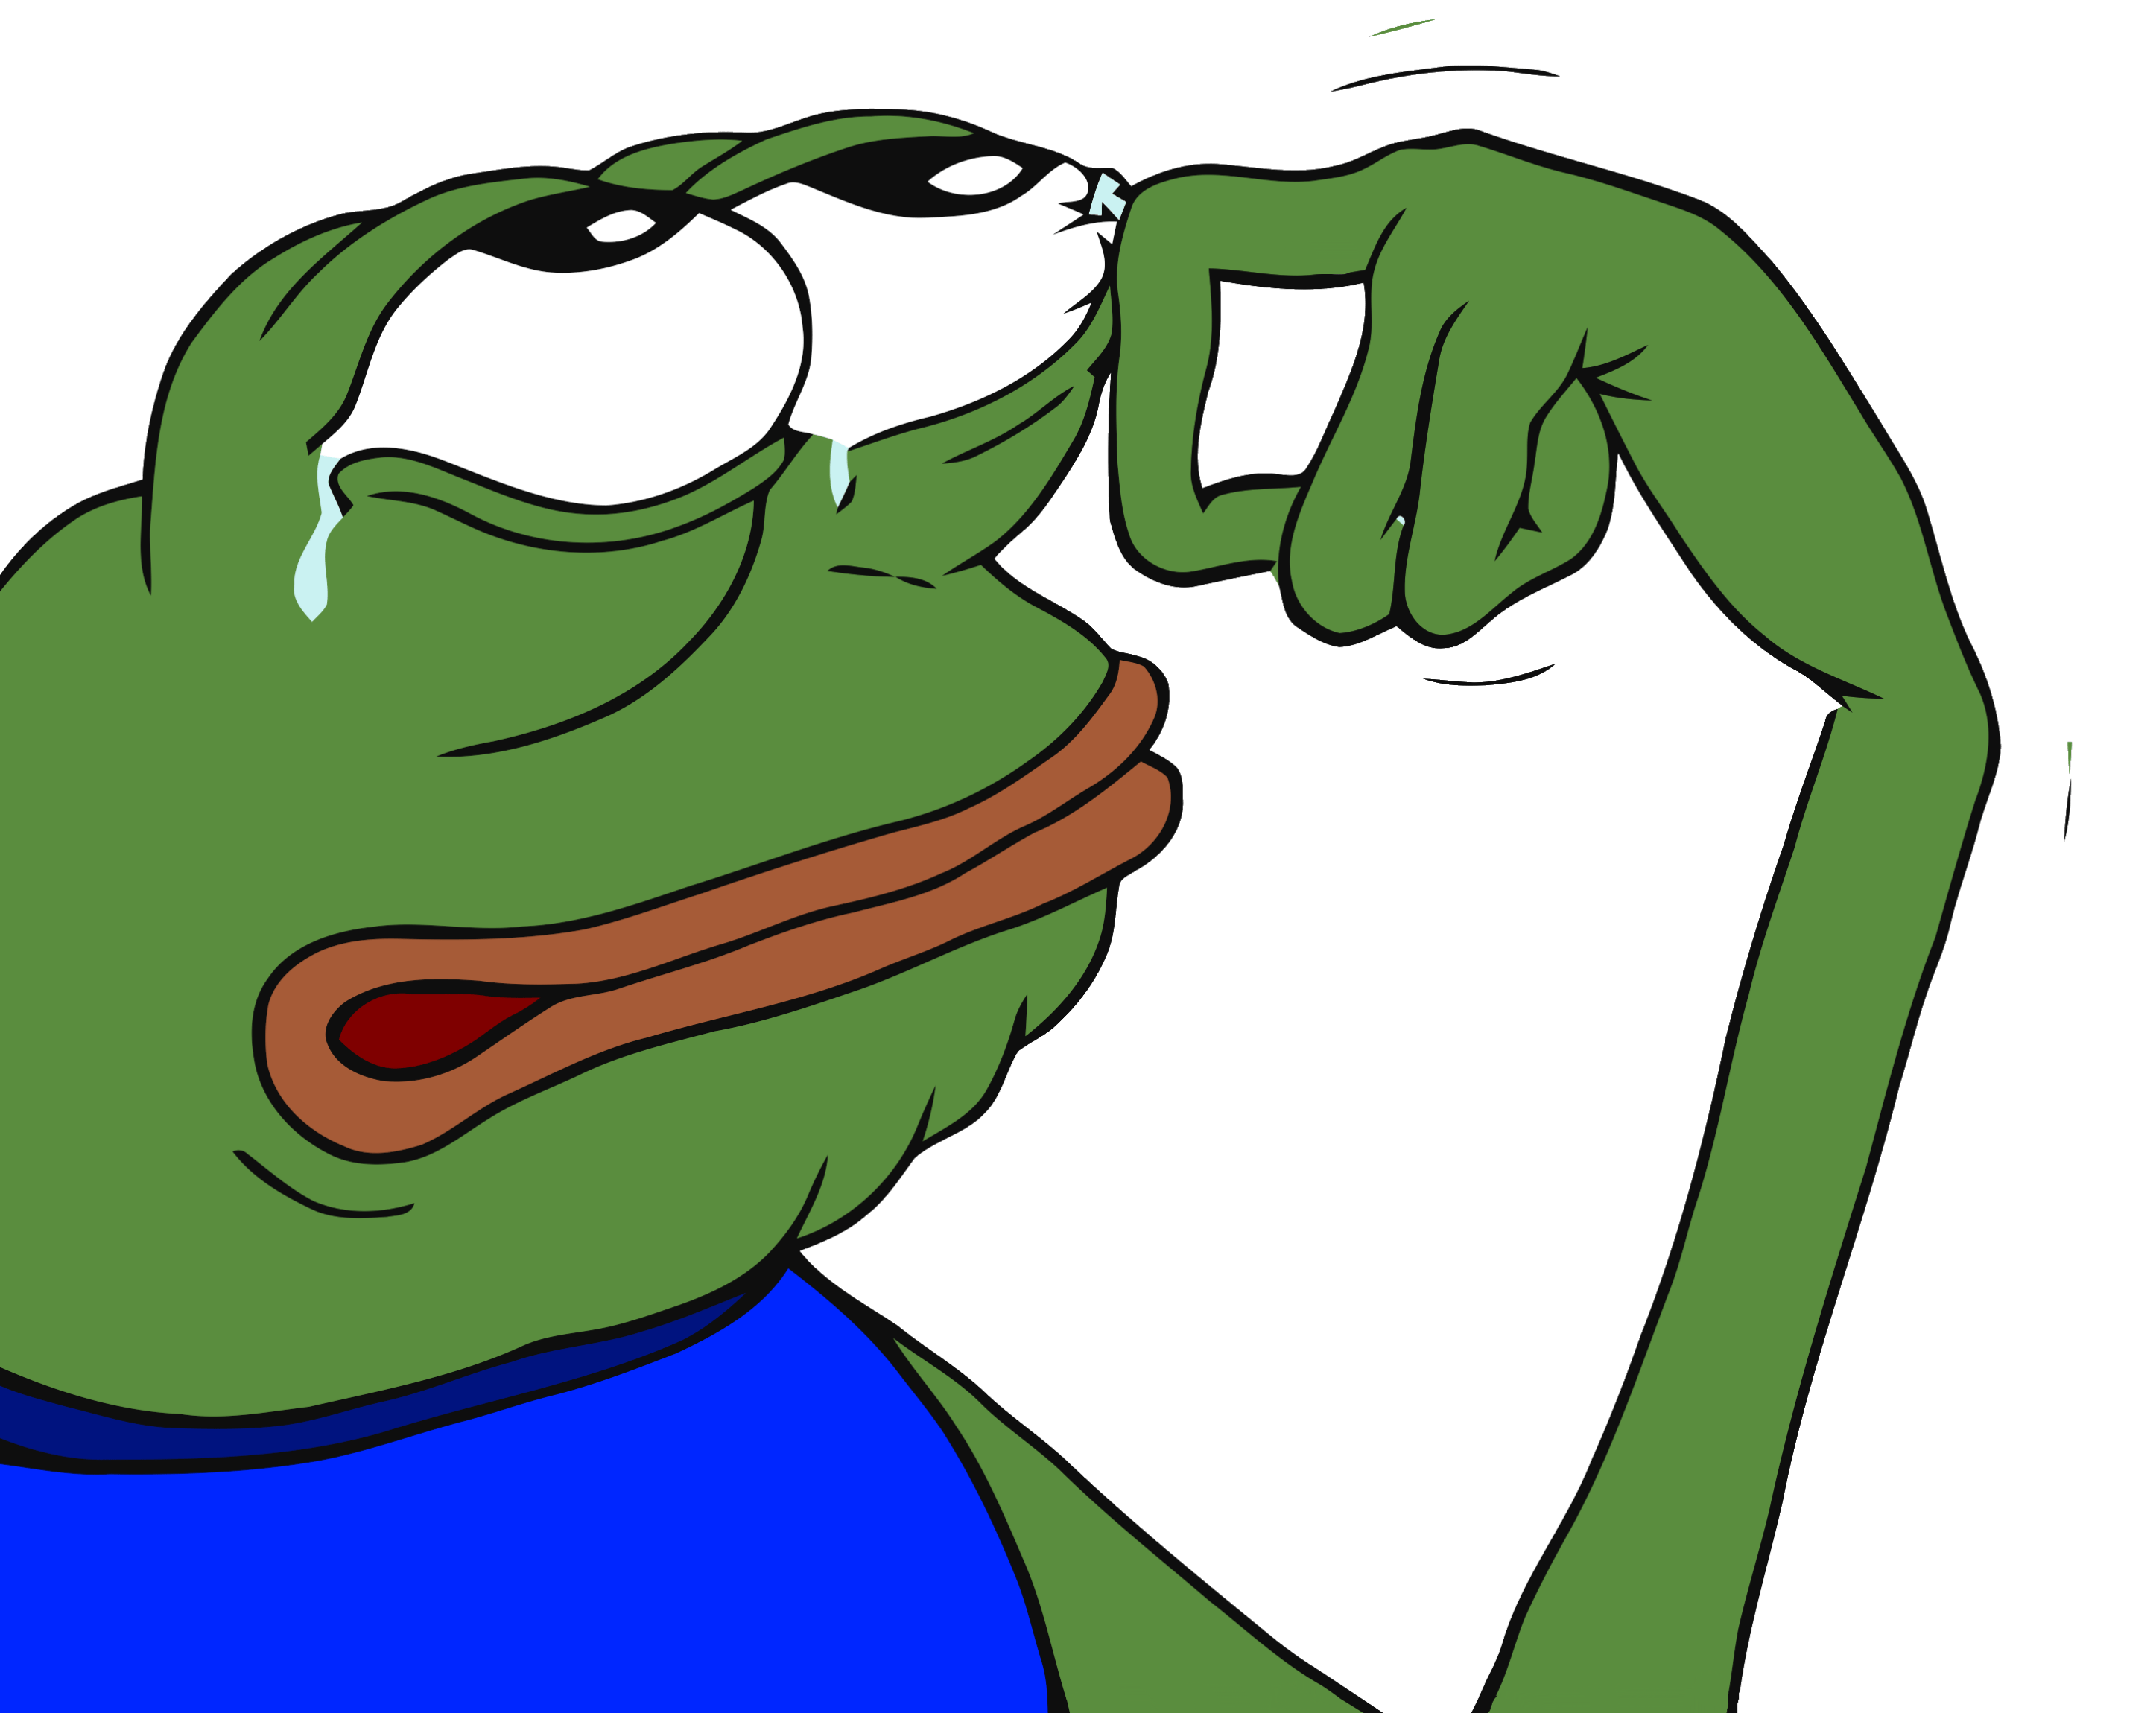 Download Picture The Pepe Frog Sad HQ PNG Image FreePNGImg.